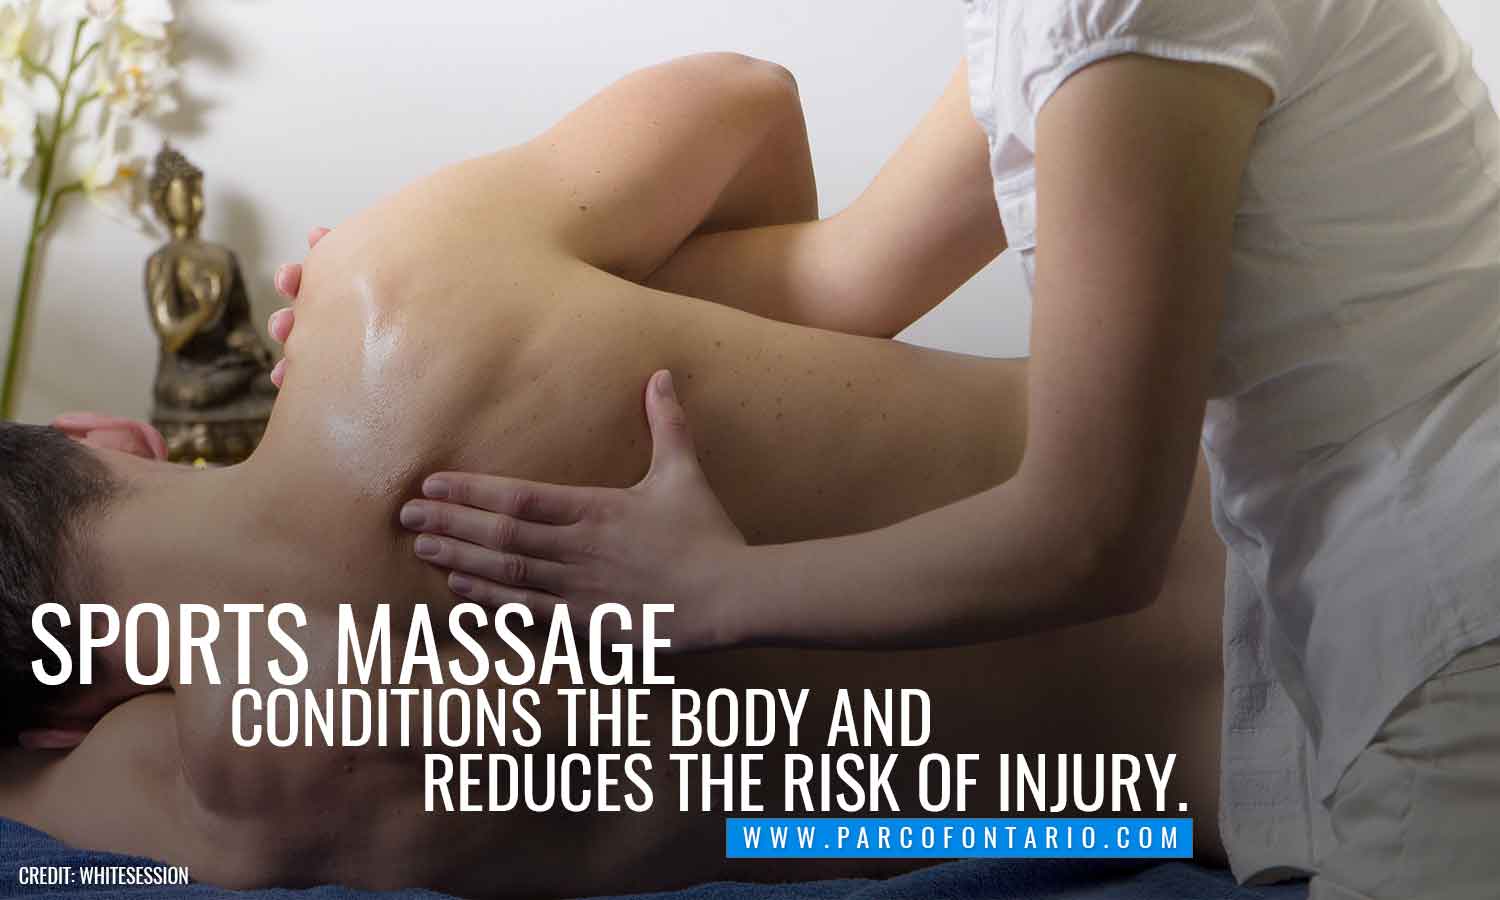 Sports massage conditions body reduces injury